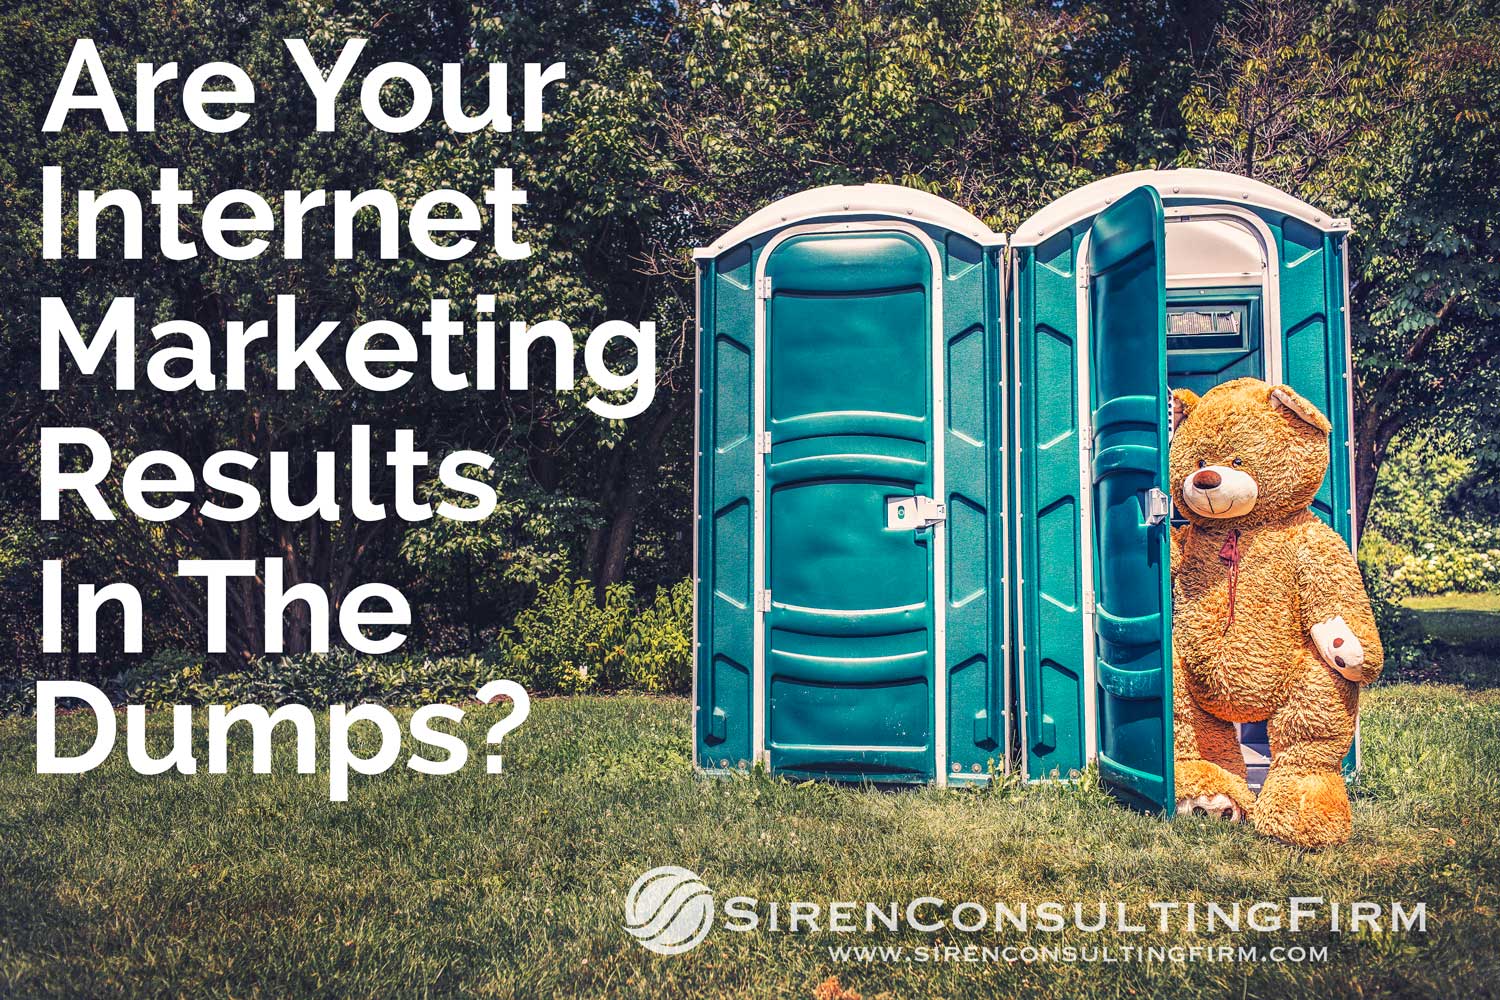 Not Getting The Internet Marketing Results You Wanted?